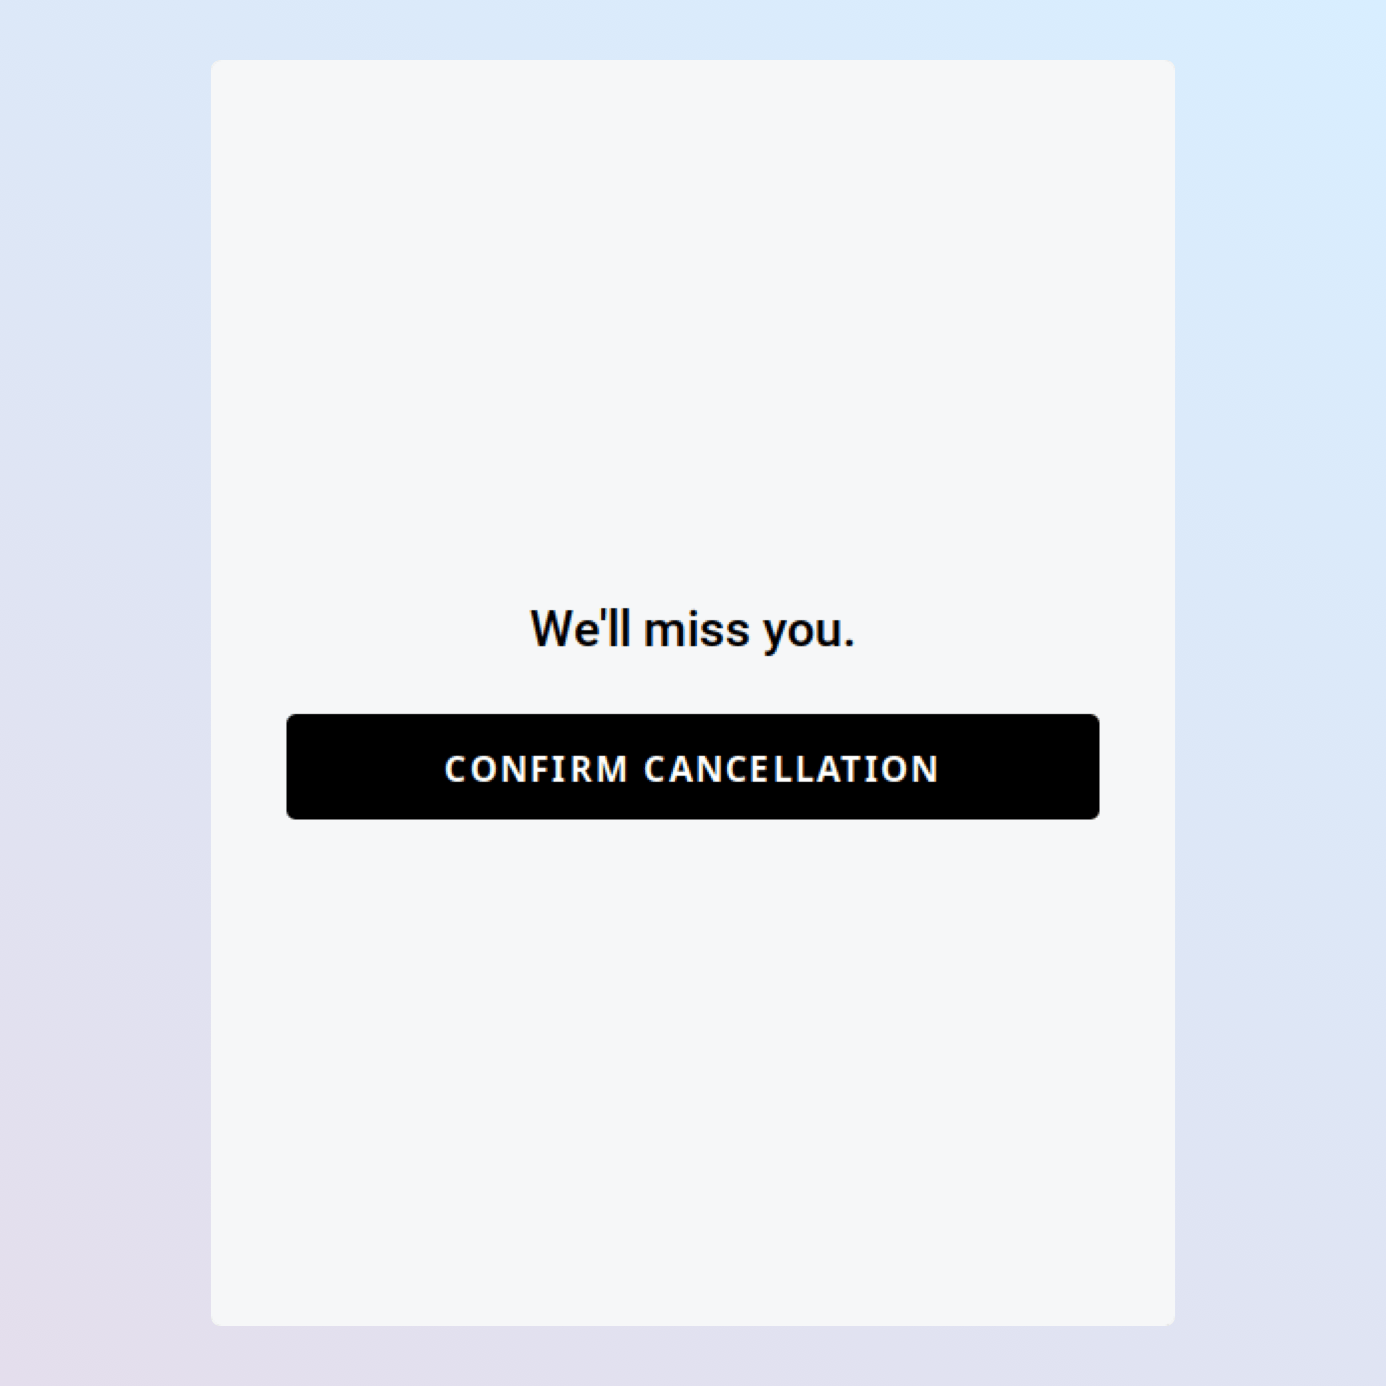 Retain Cancellation Flow modal in regions with one-click cancellation. It says we'll miss you, then there's a button to confirm cancellation.